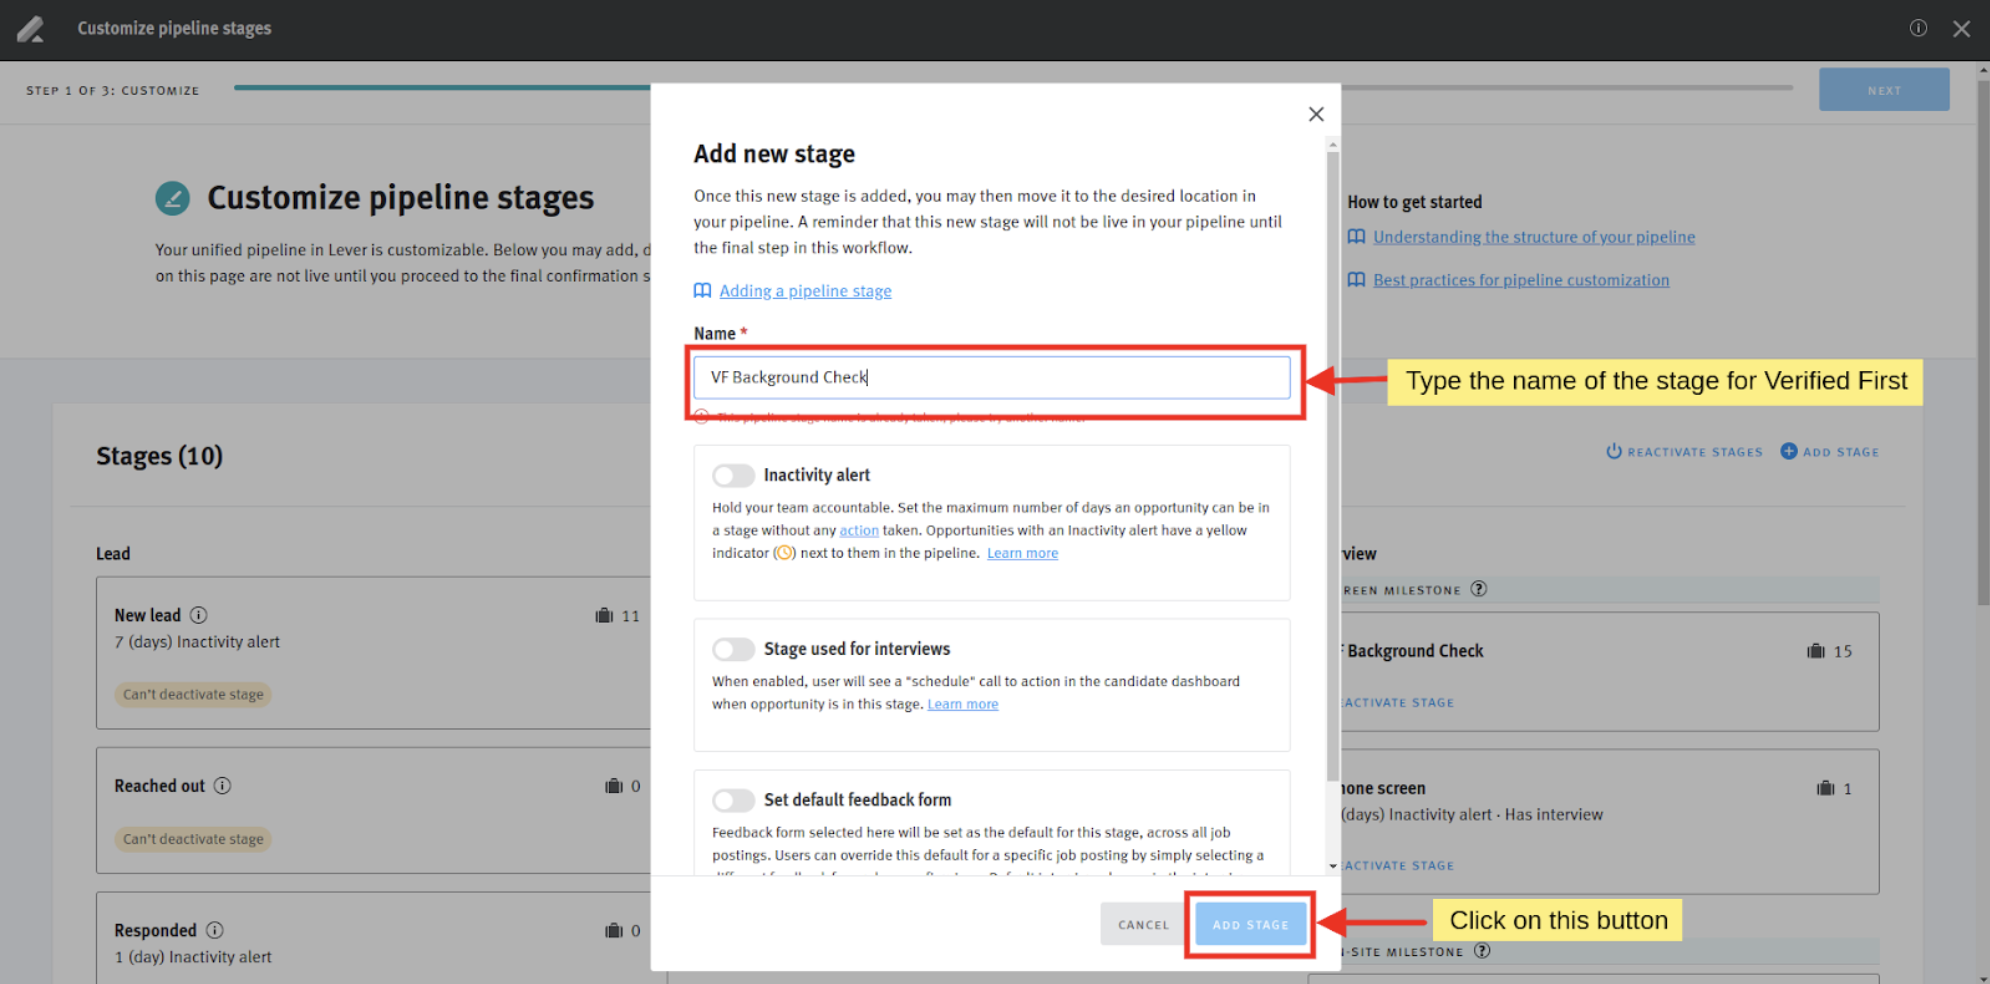 Add new stage modal in pipeline stage customization interface; arrows point to name field and Add Stage button